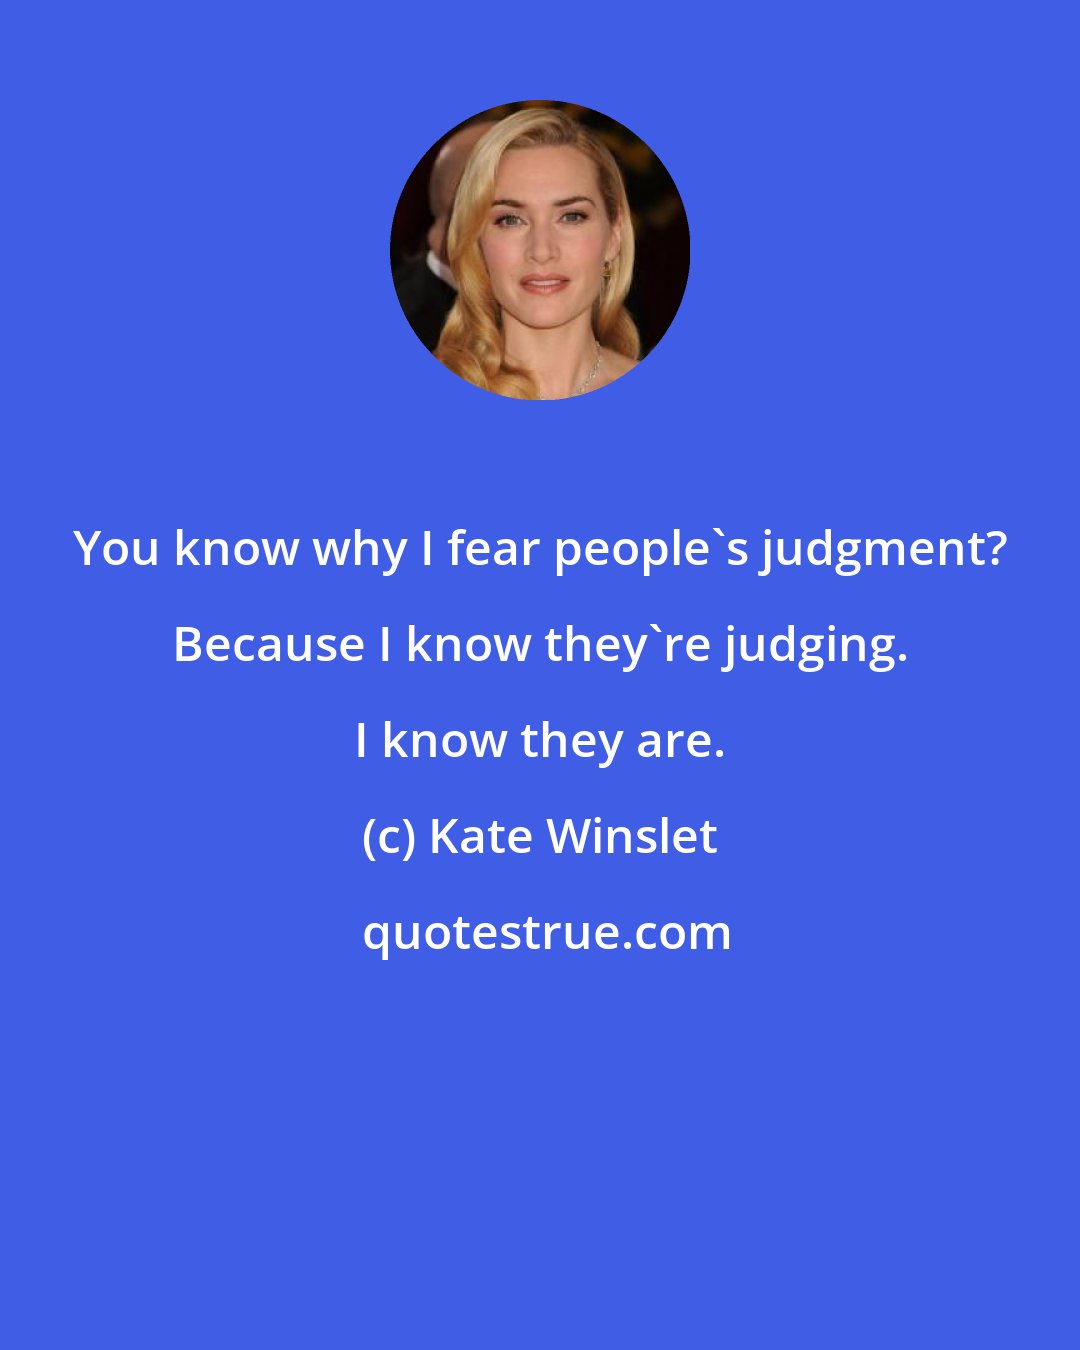 Kate Winslet: You know why I fear people's judgment? Because I know they're judging. I know they are.